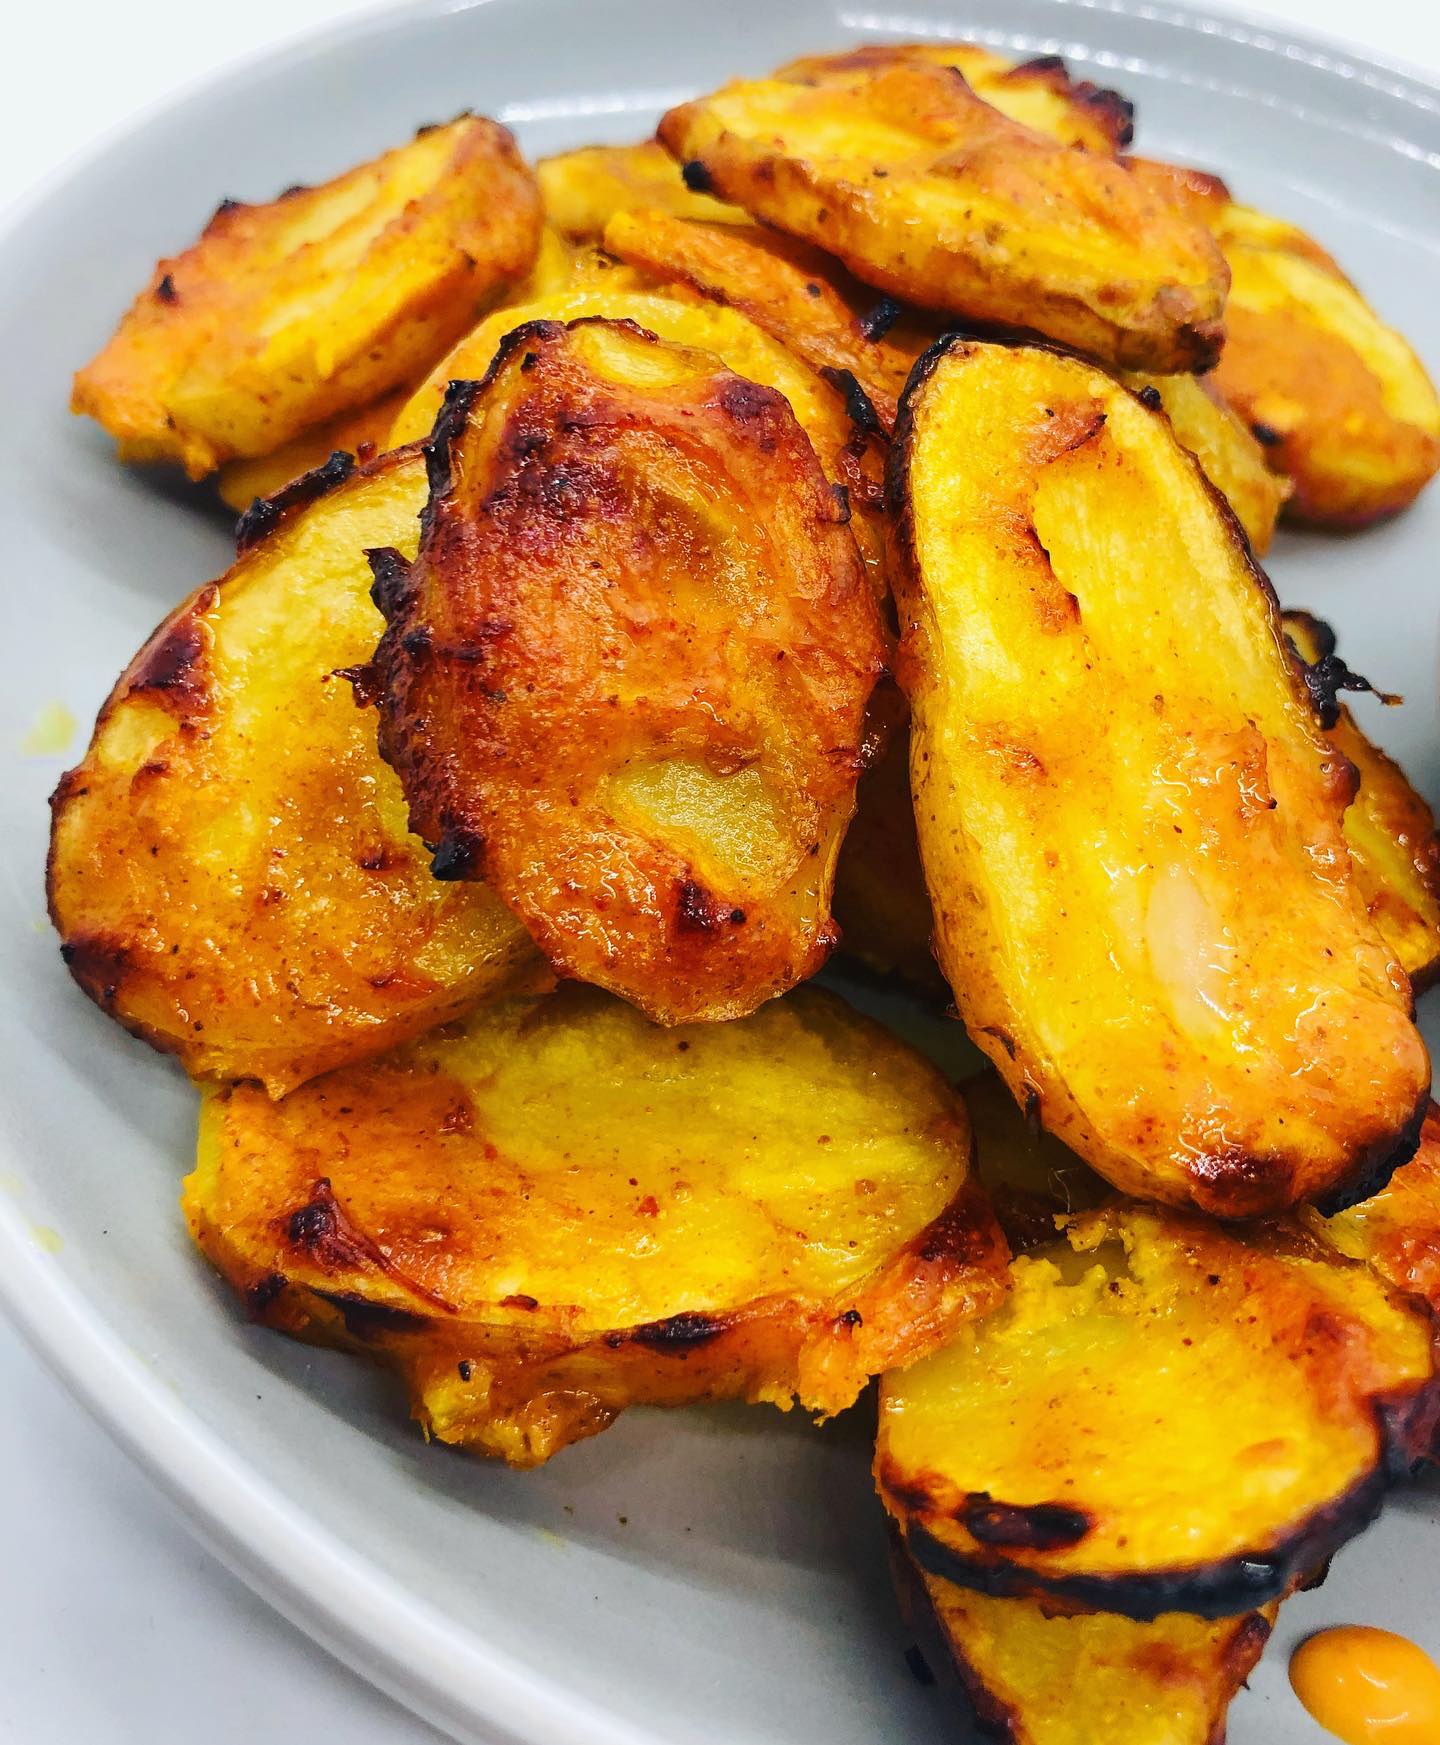 Now, these Easy Crispy Harissa Roasted Potatoes are super easy to make, they are crispy, delicious and do not need a lot of ingredients to make!